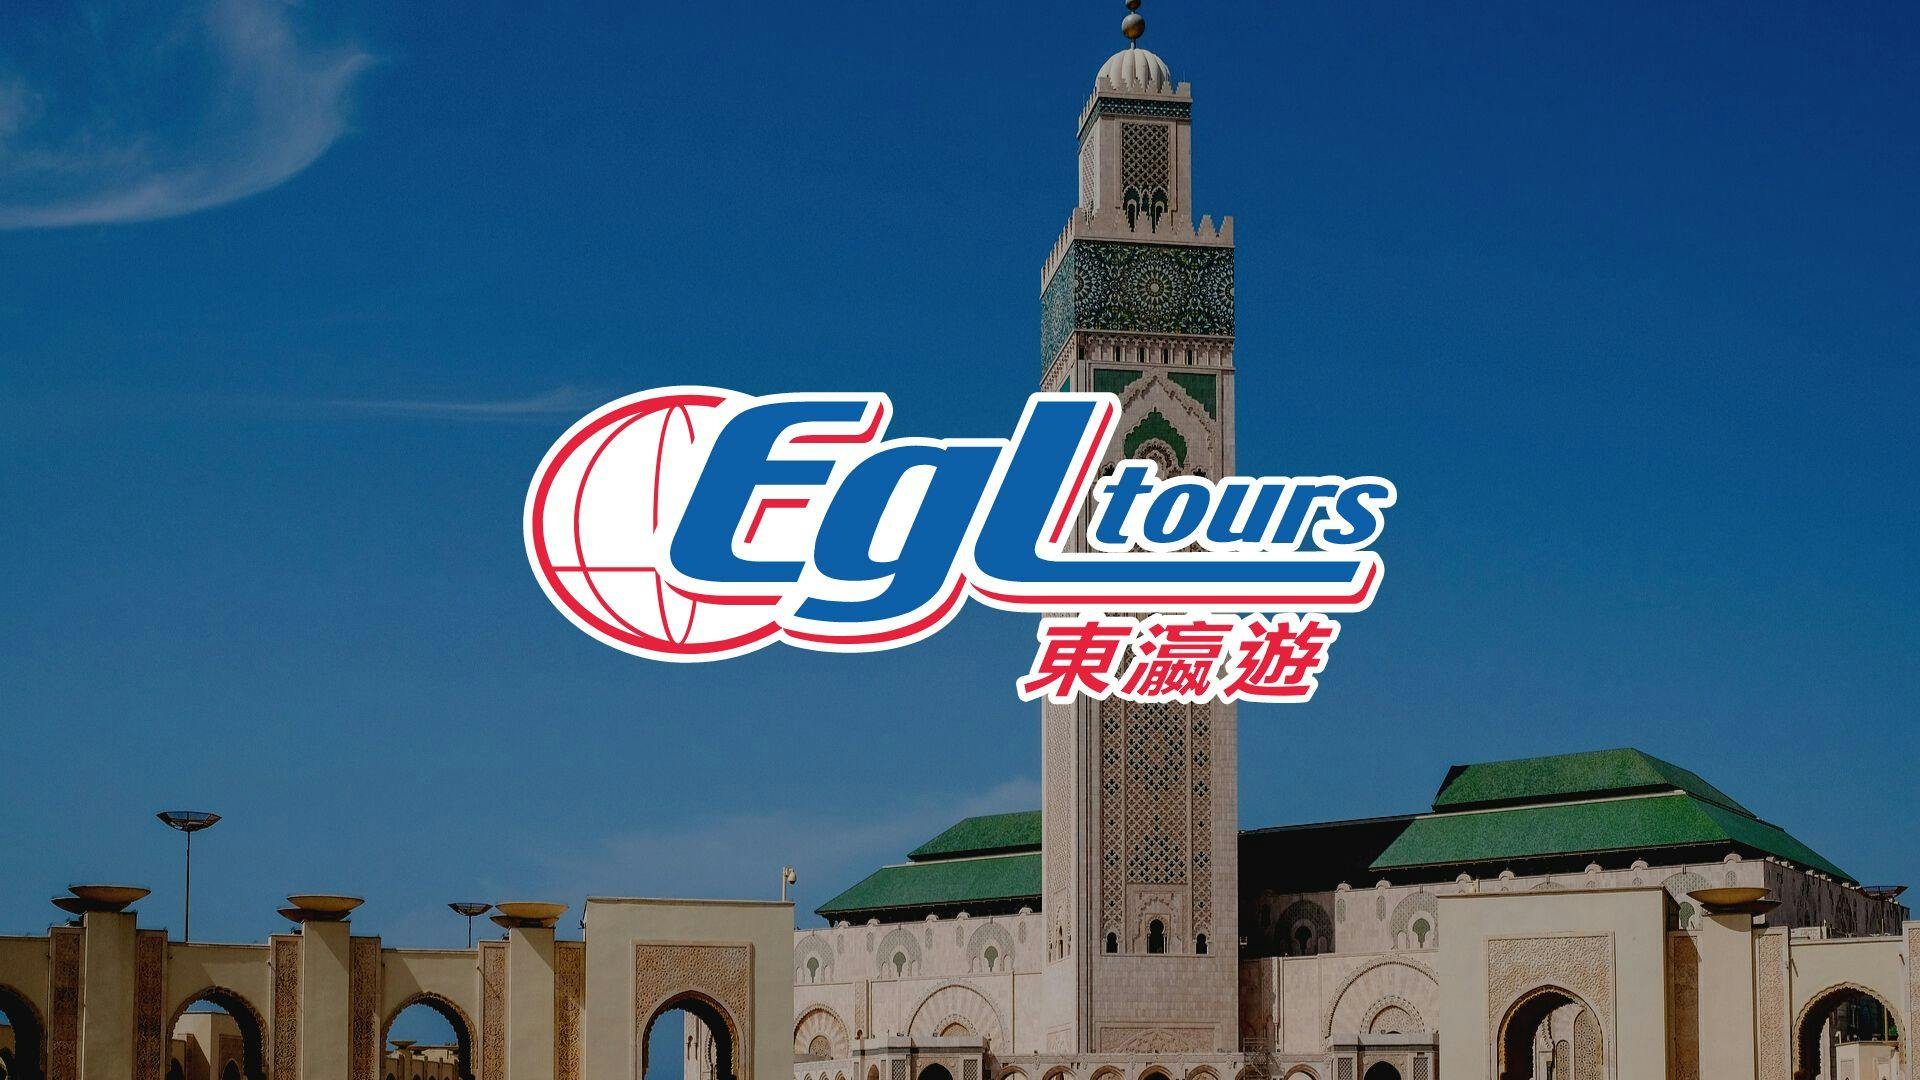 How EGL Tours improve sales efficiency with SleekFlow